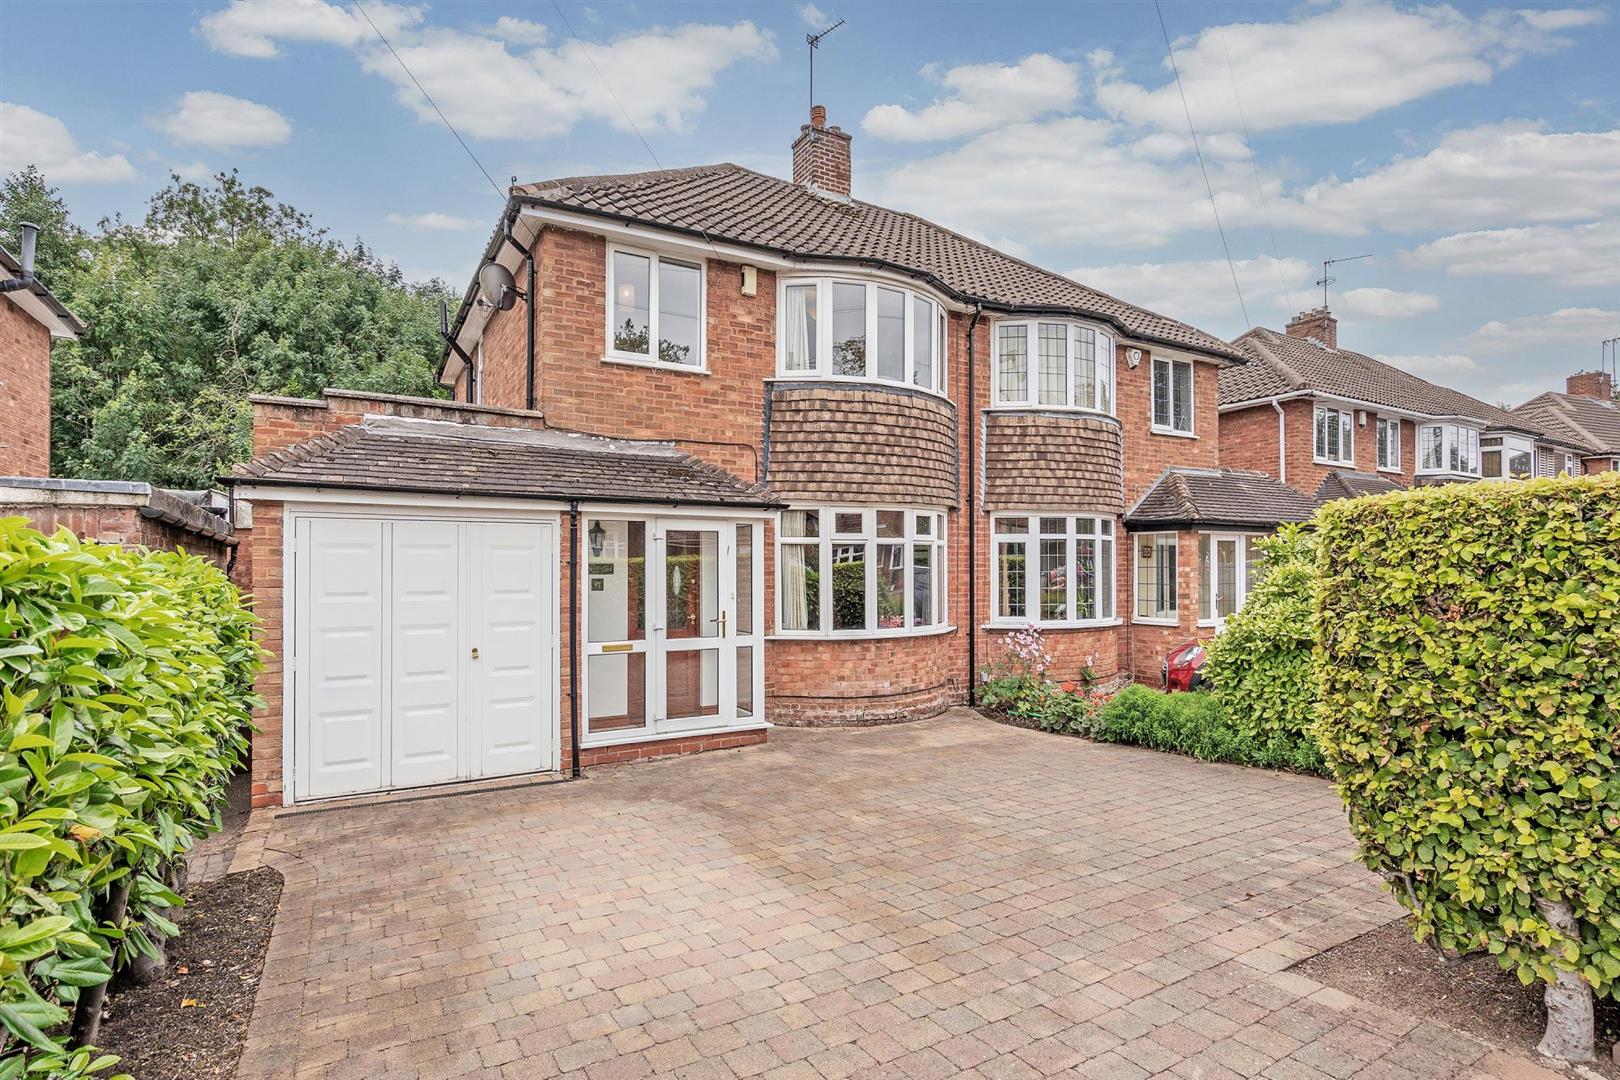 3 bed  for sale in Henley Crescent, Solihull, B91 